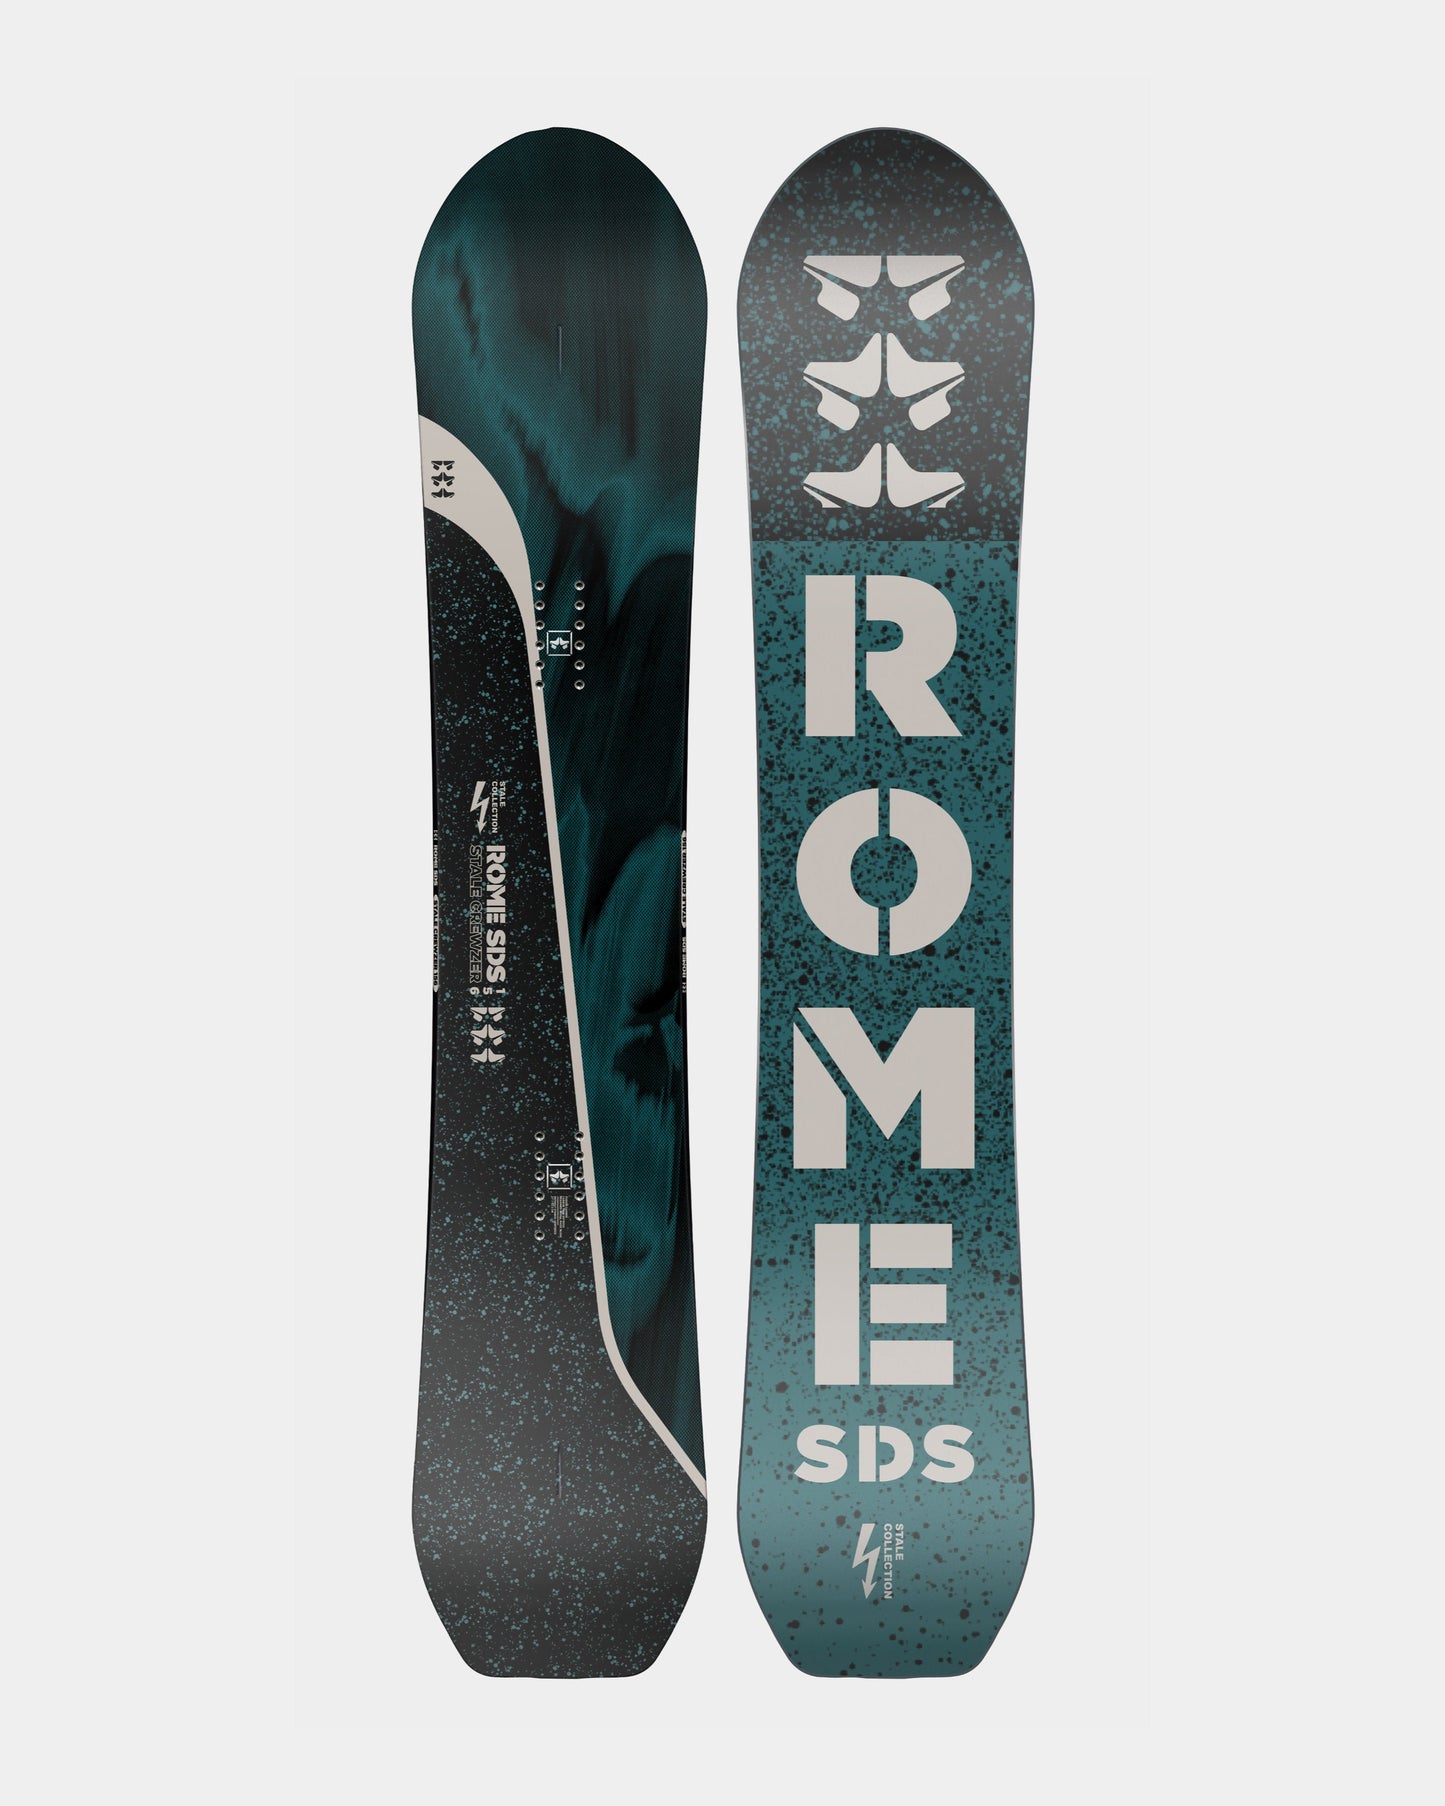 Rome Stale Crewzer 2023 product photo from the front and back cover shot in the studio